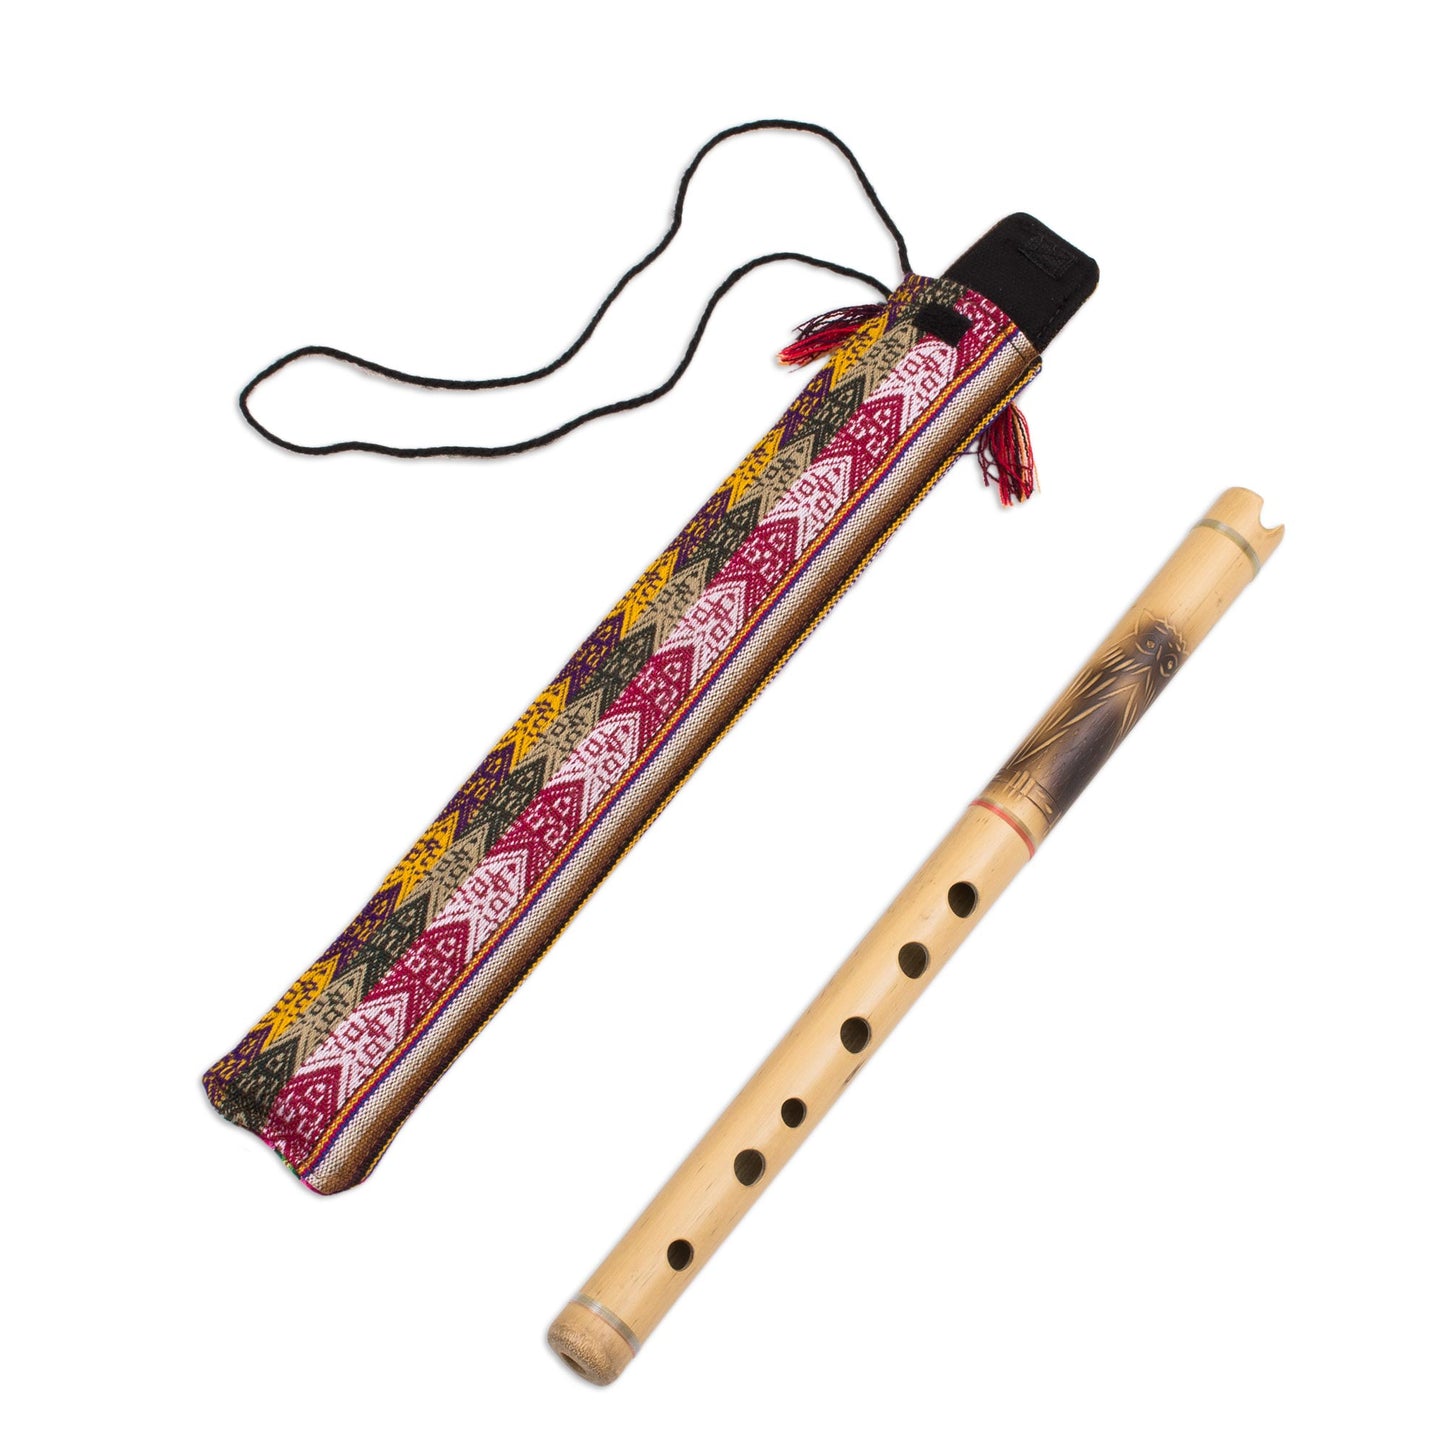 Night Owl Bamboo Andean Quena Flute